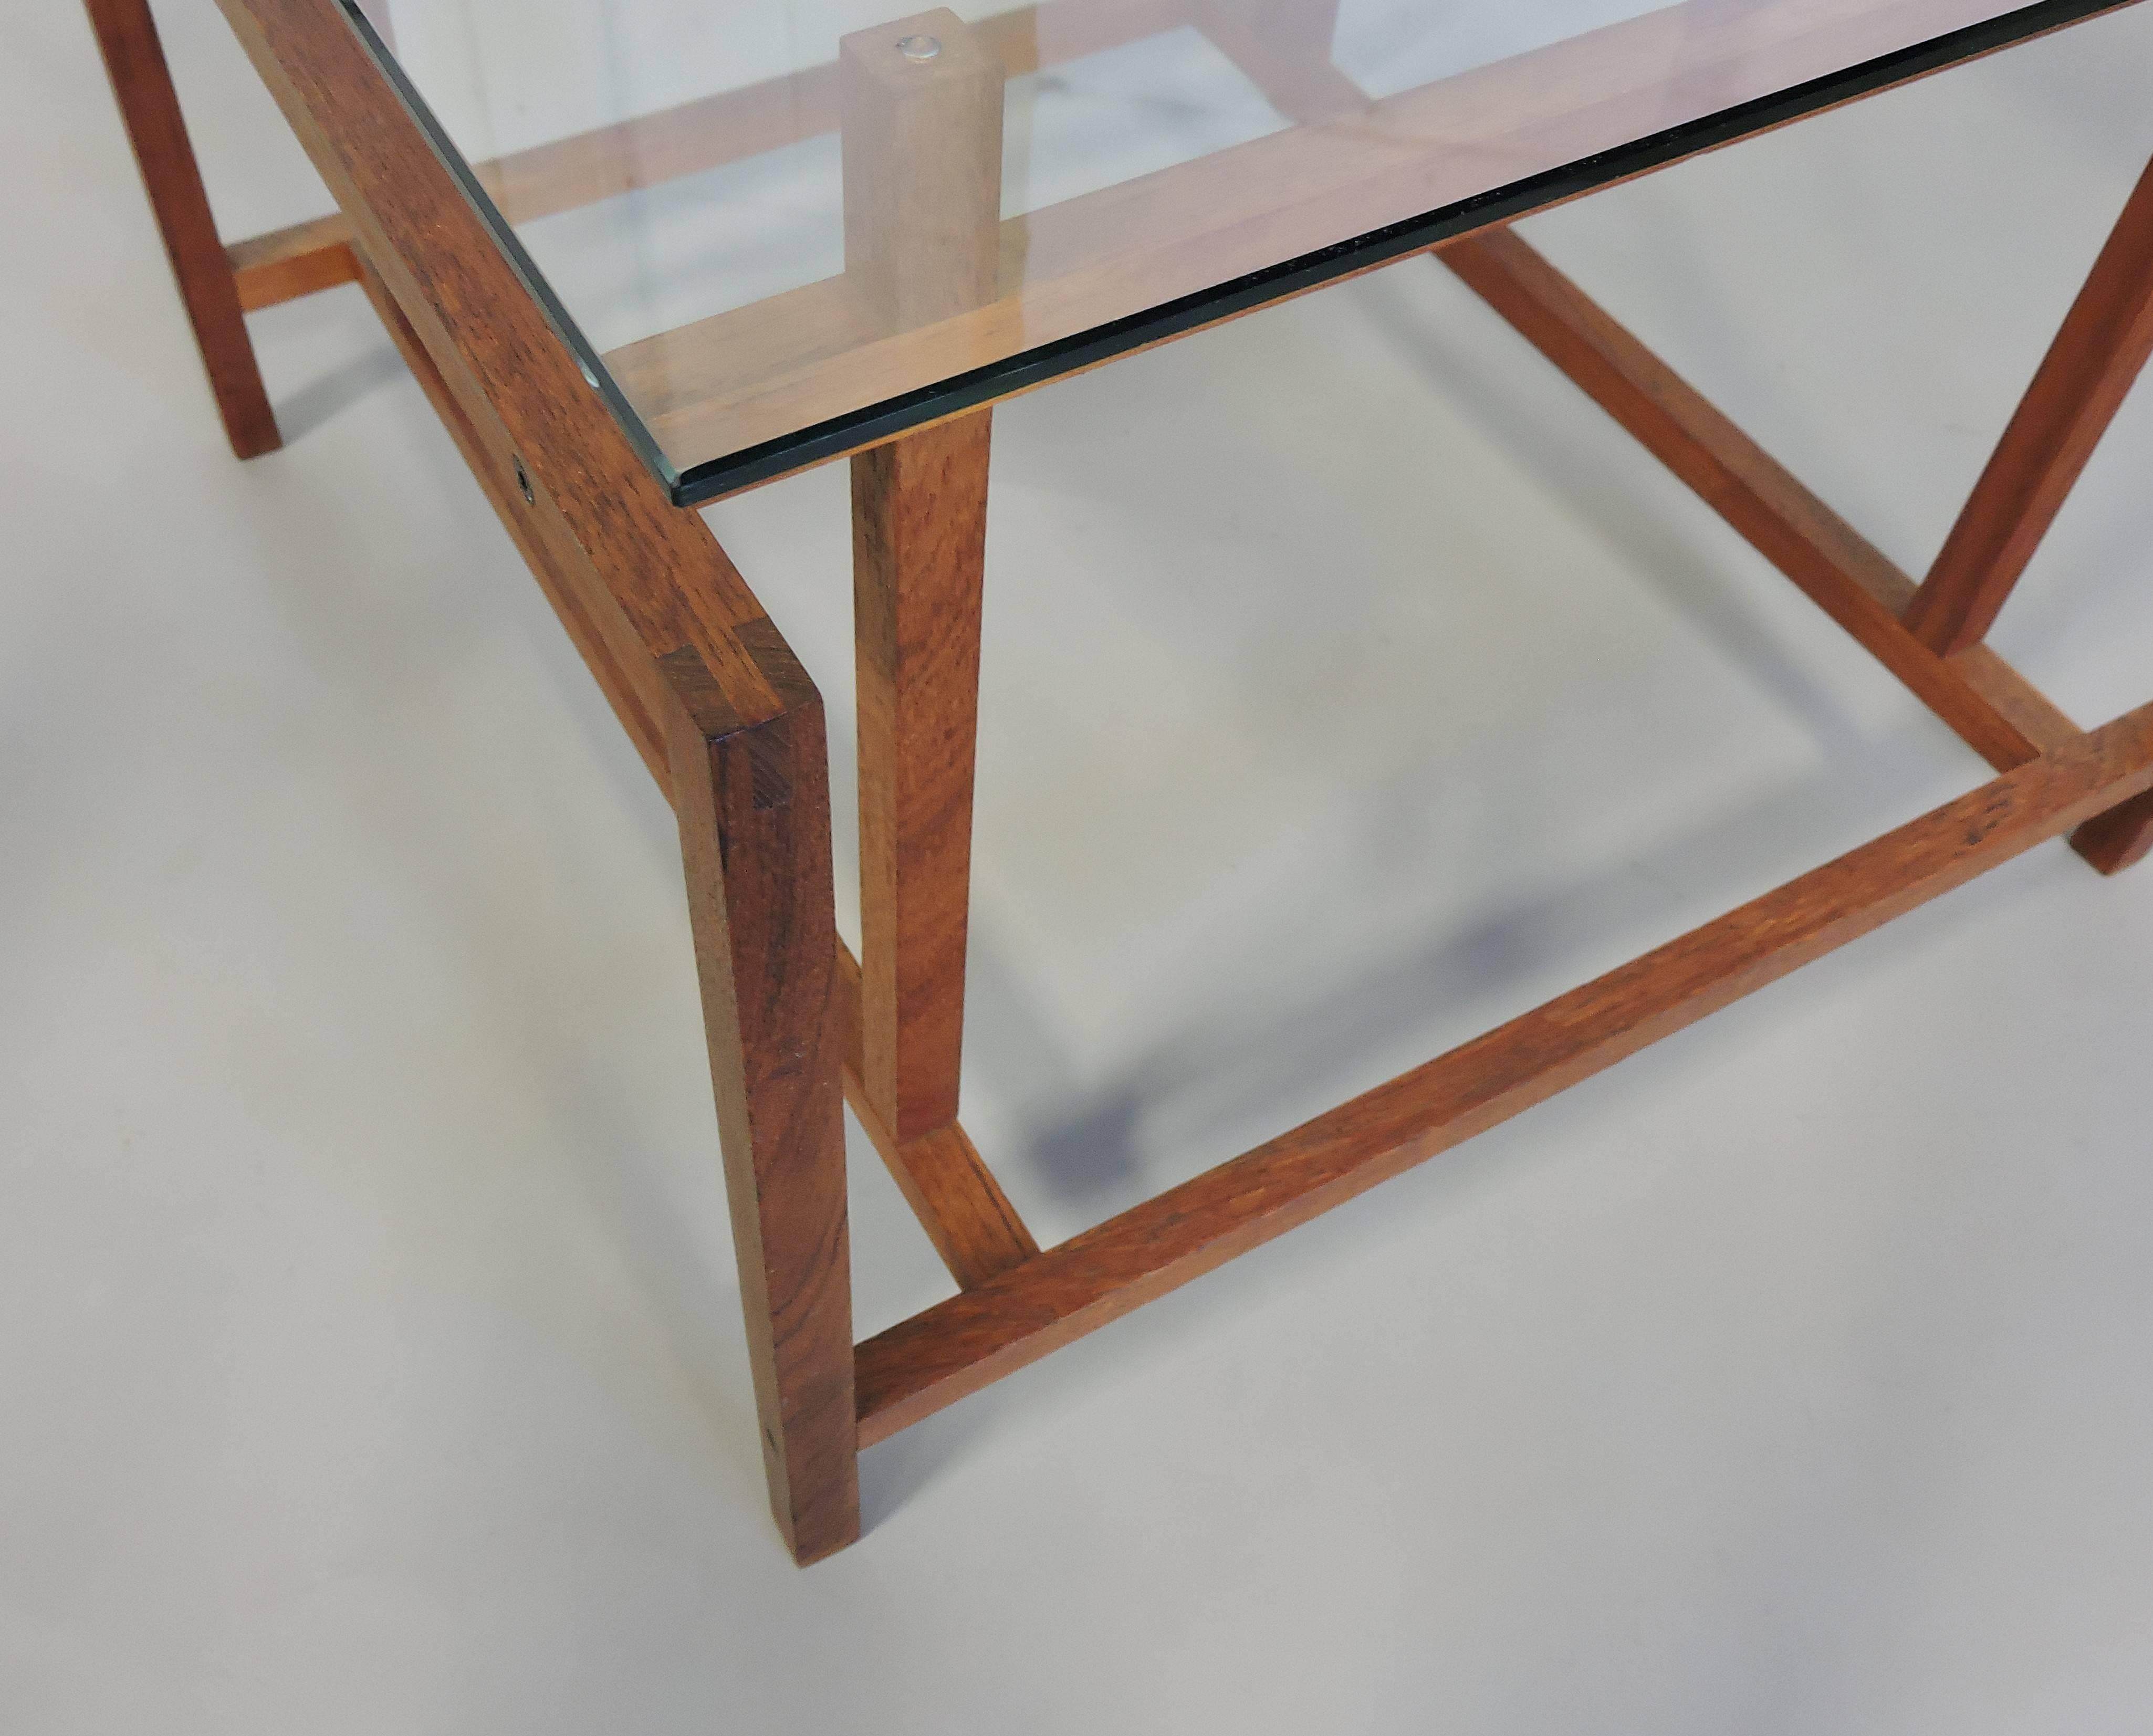 Mid-20th Century Danish Modern Teak and Glass Side End Table by Henning Norgaard for Komfort